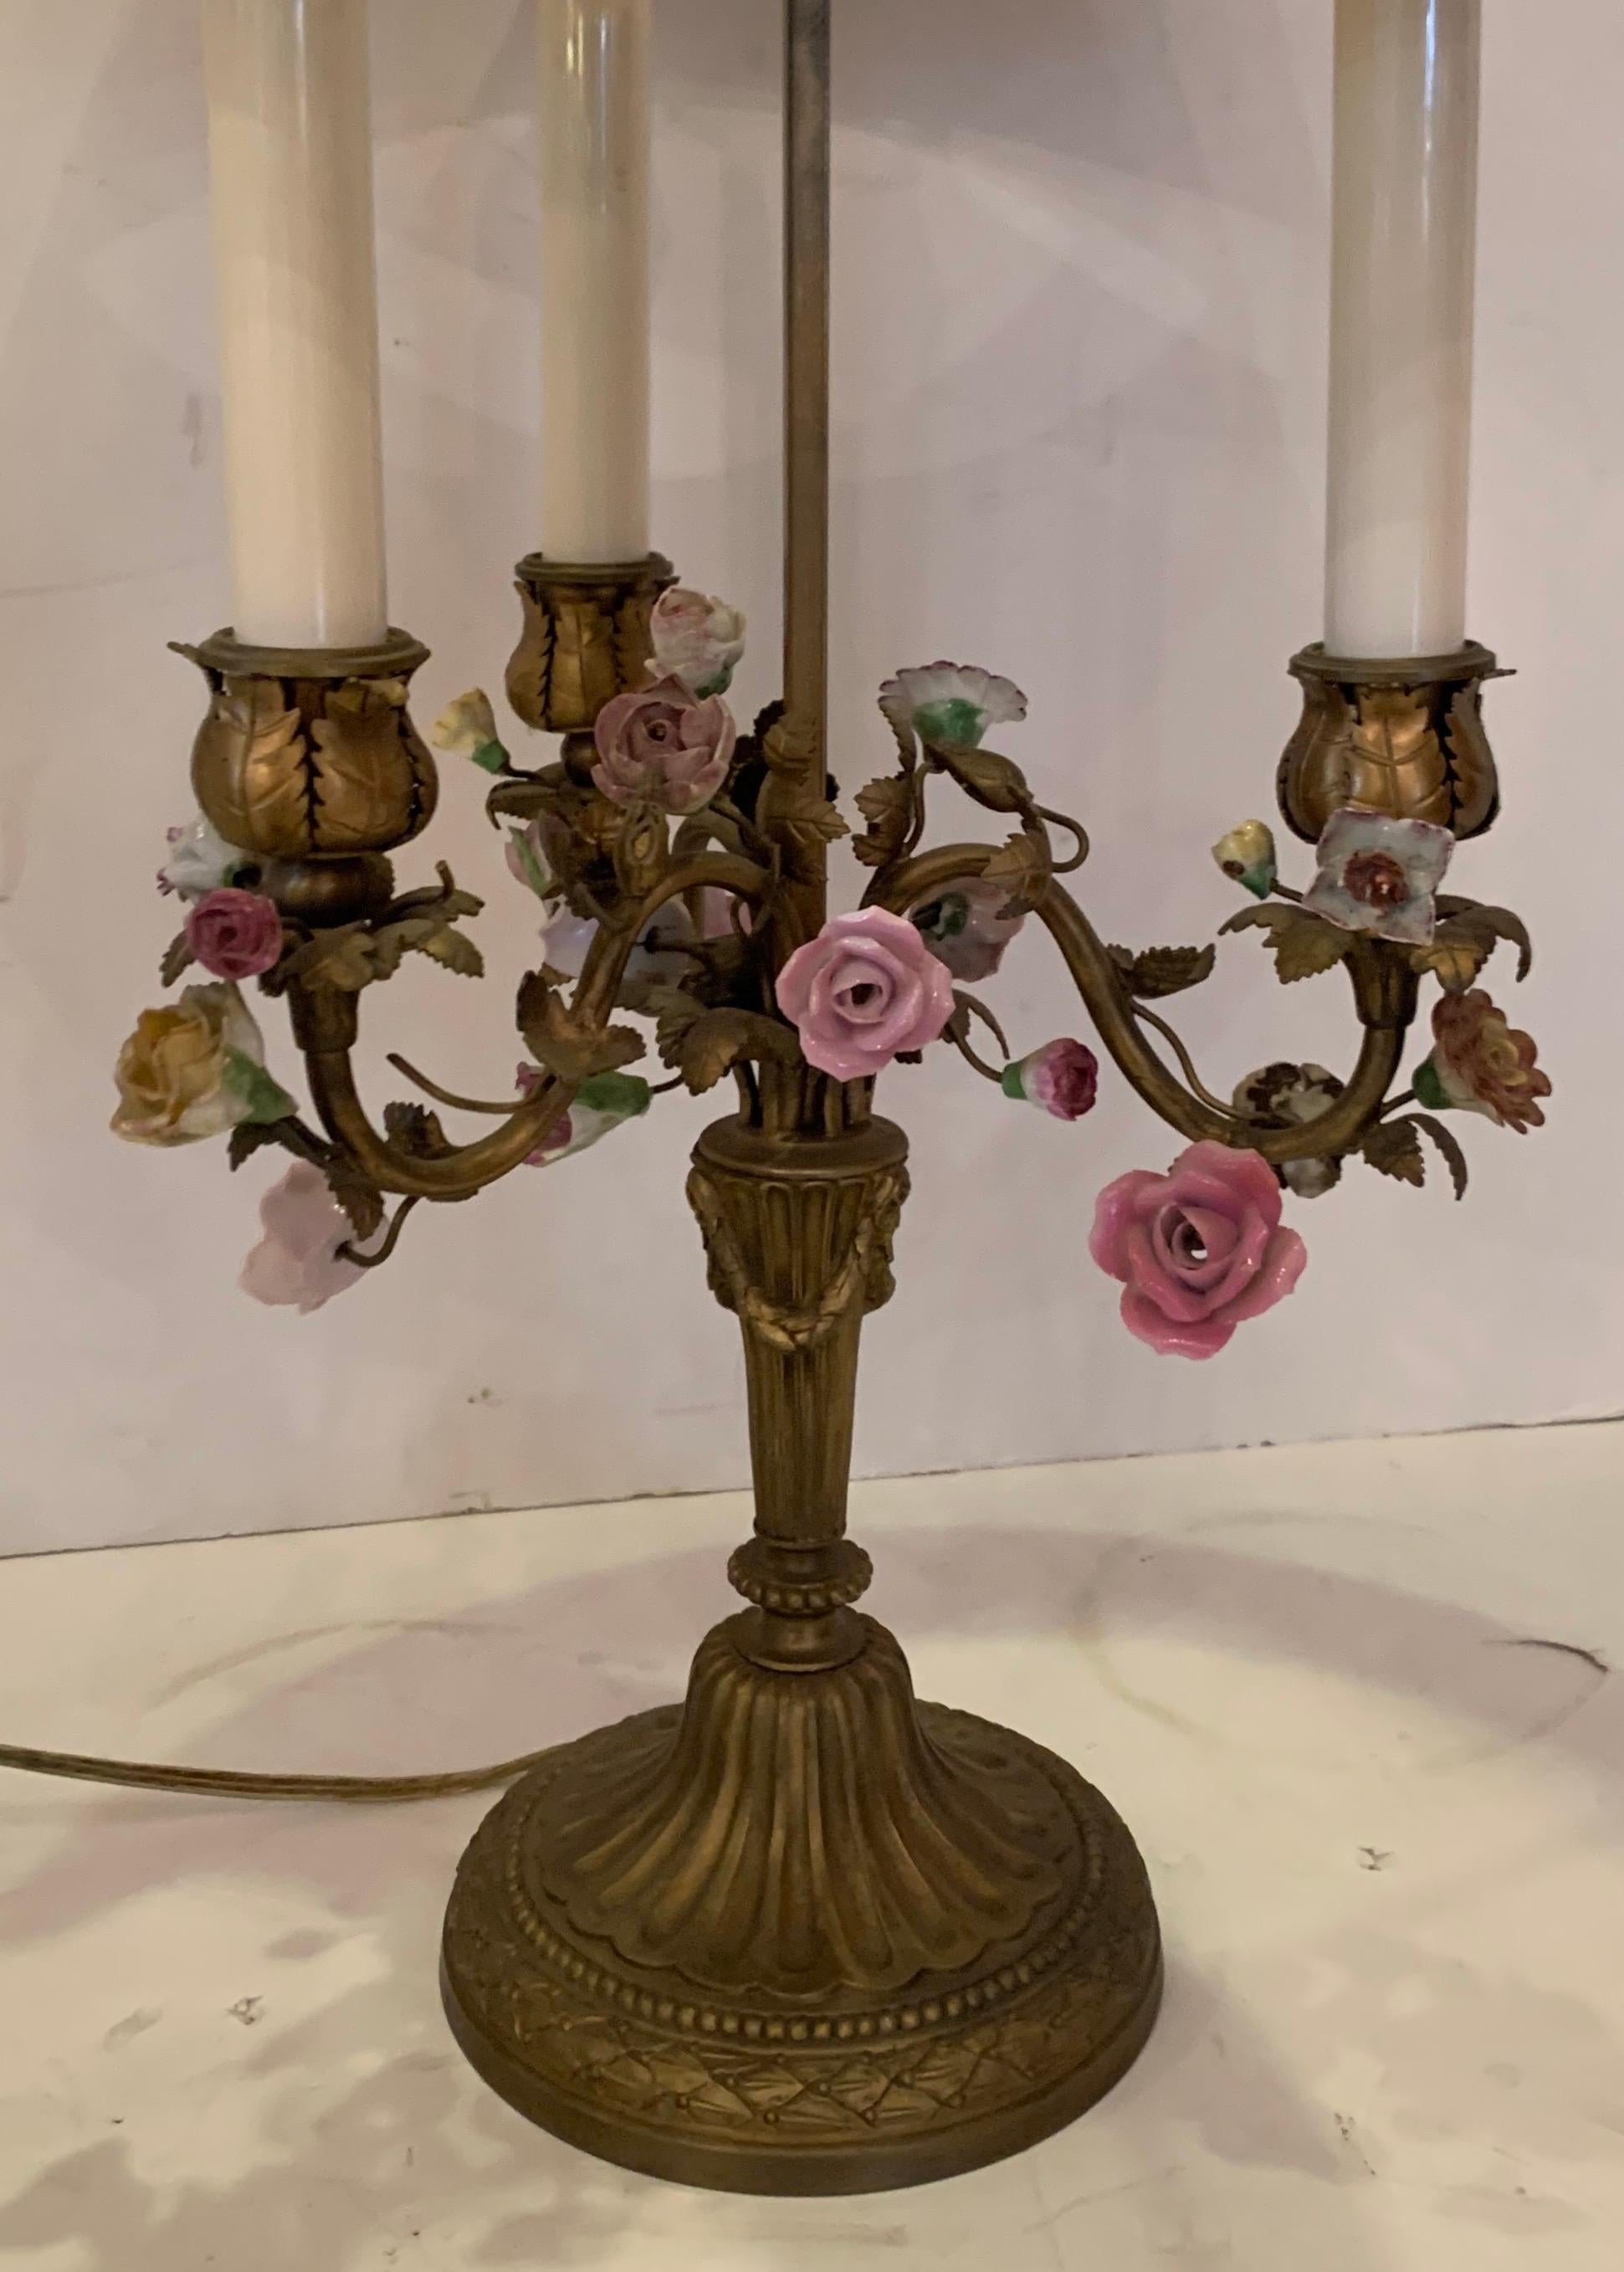 A wonderful French bronze candelabra Bouillotte lamp with porcelain flowers and red tole shade.